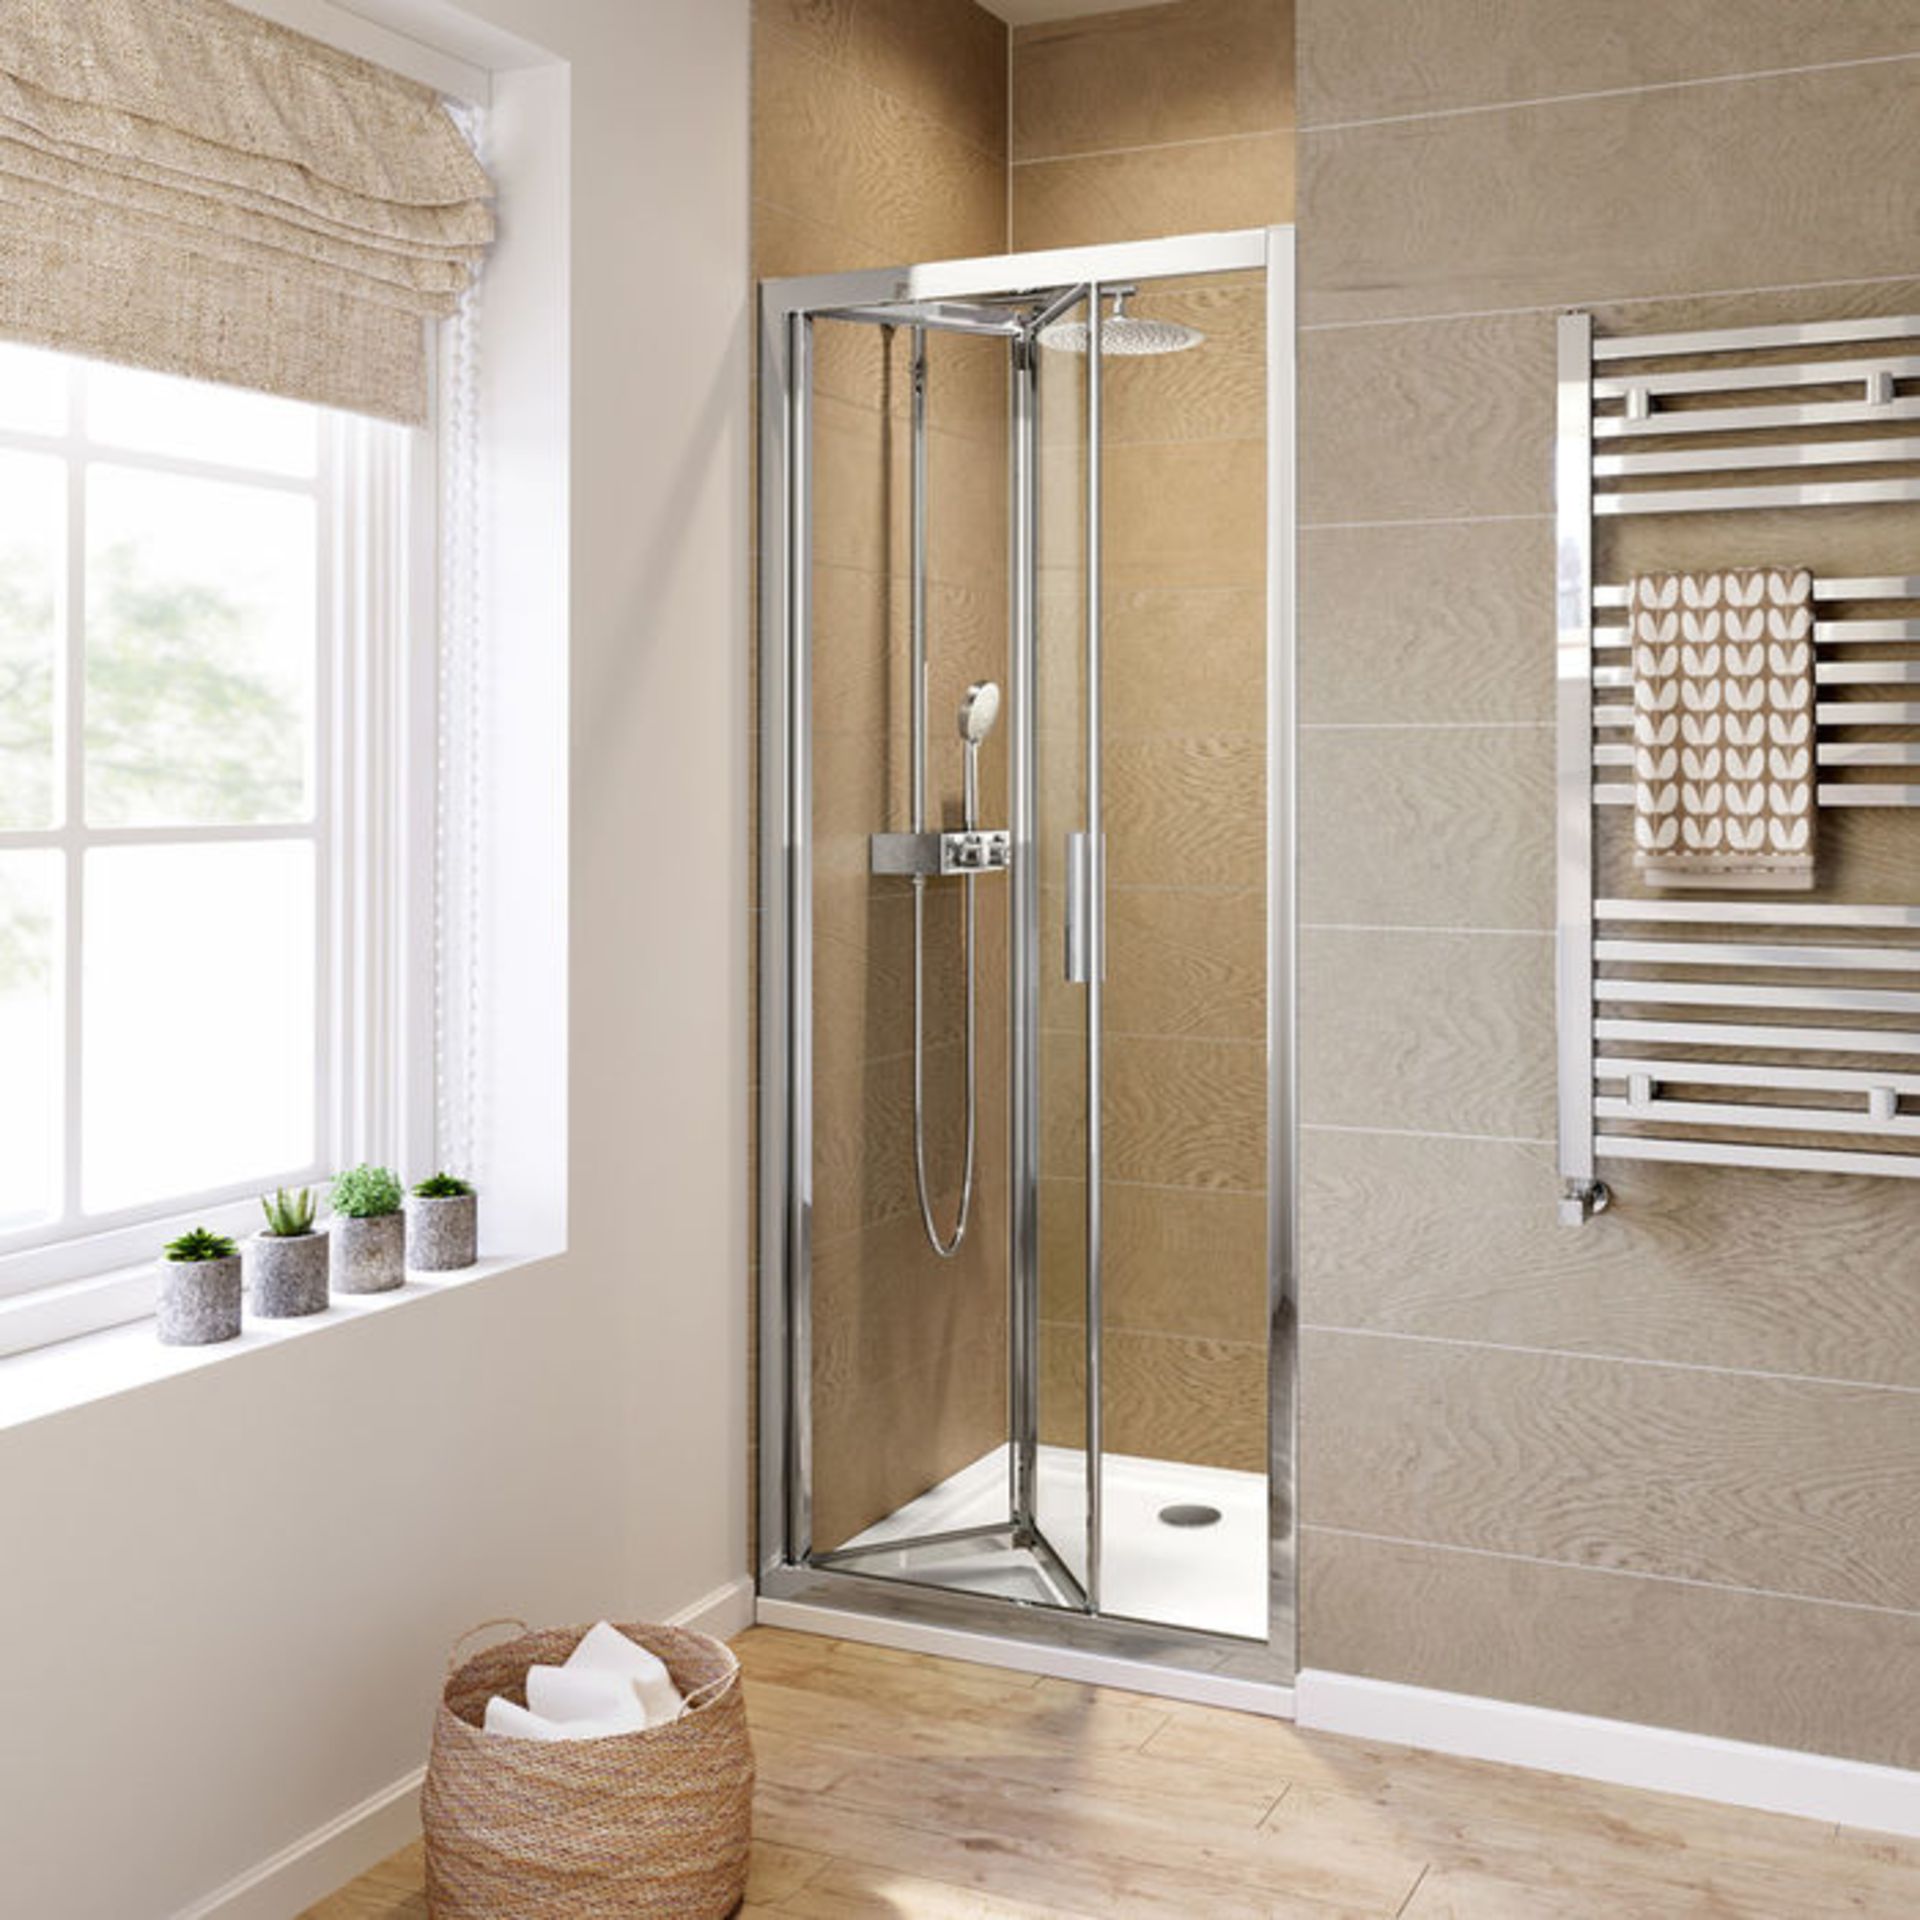 (W73) 800mm - 6mm - Elements EasyClean Bifold Shower Door. RRP £299.99. 6mm Safety Glass - Single- - Image 2 of 3